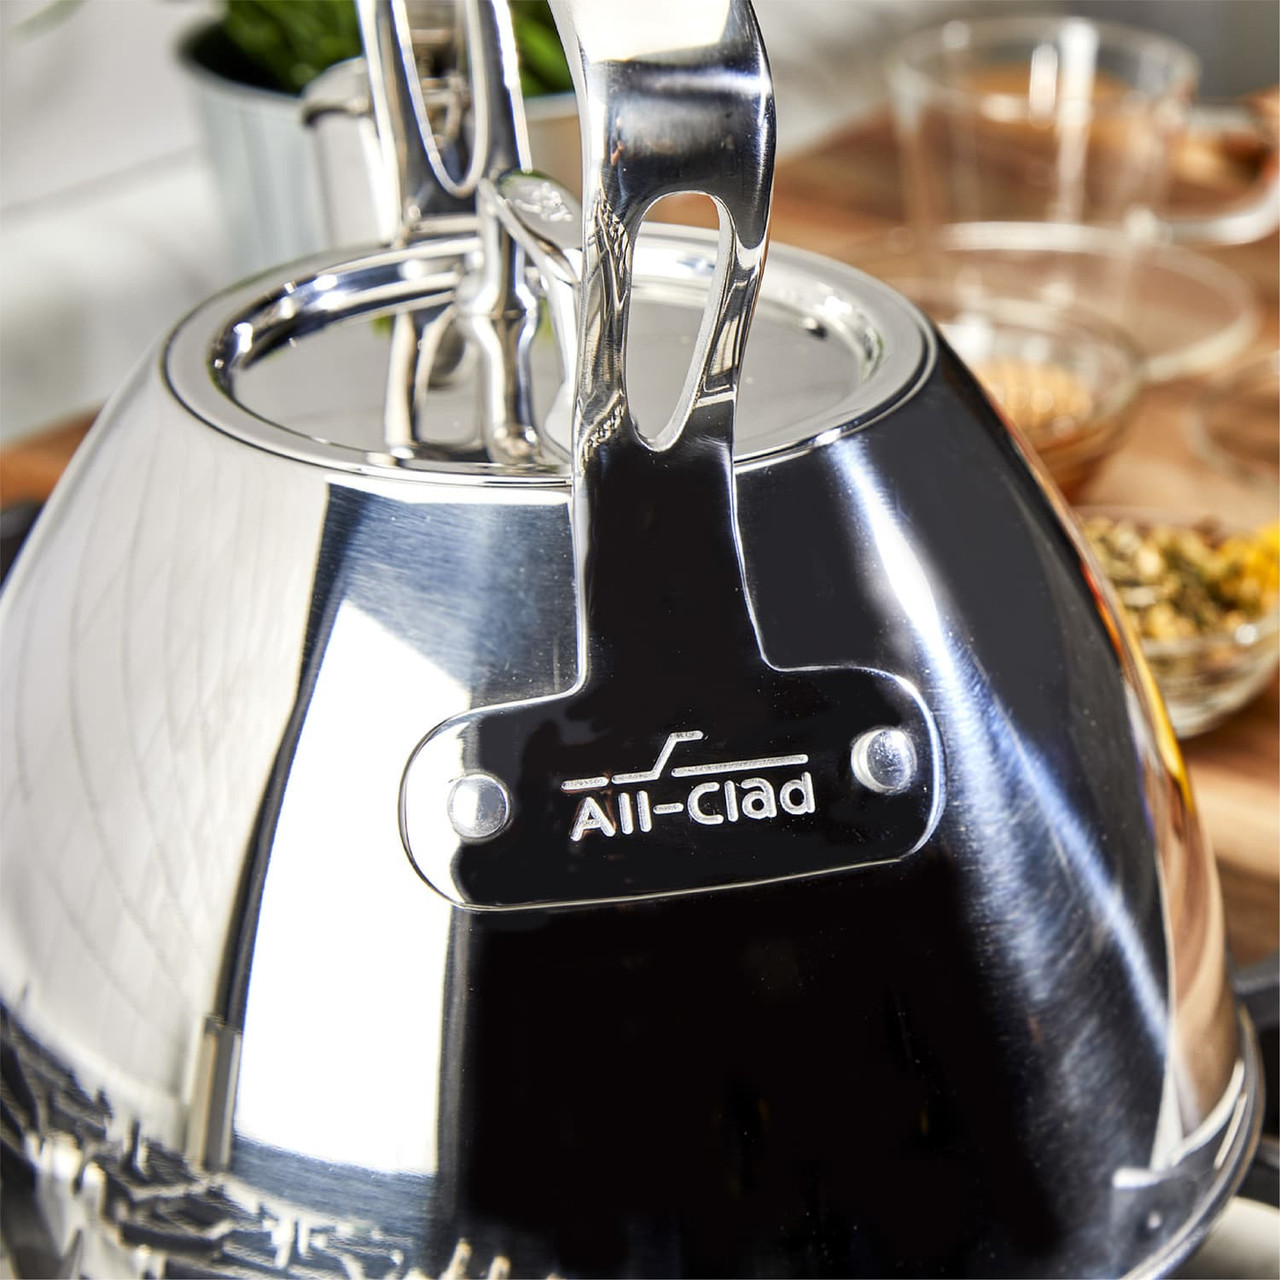 New All-clad Stainless Steel 2 Qt Tea Kettle in Original Box 